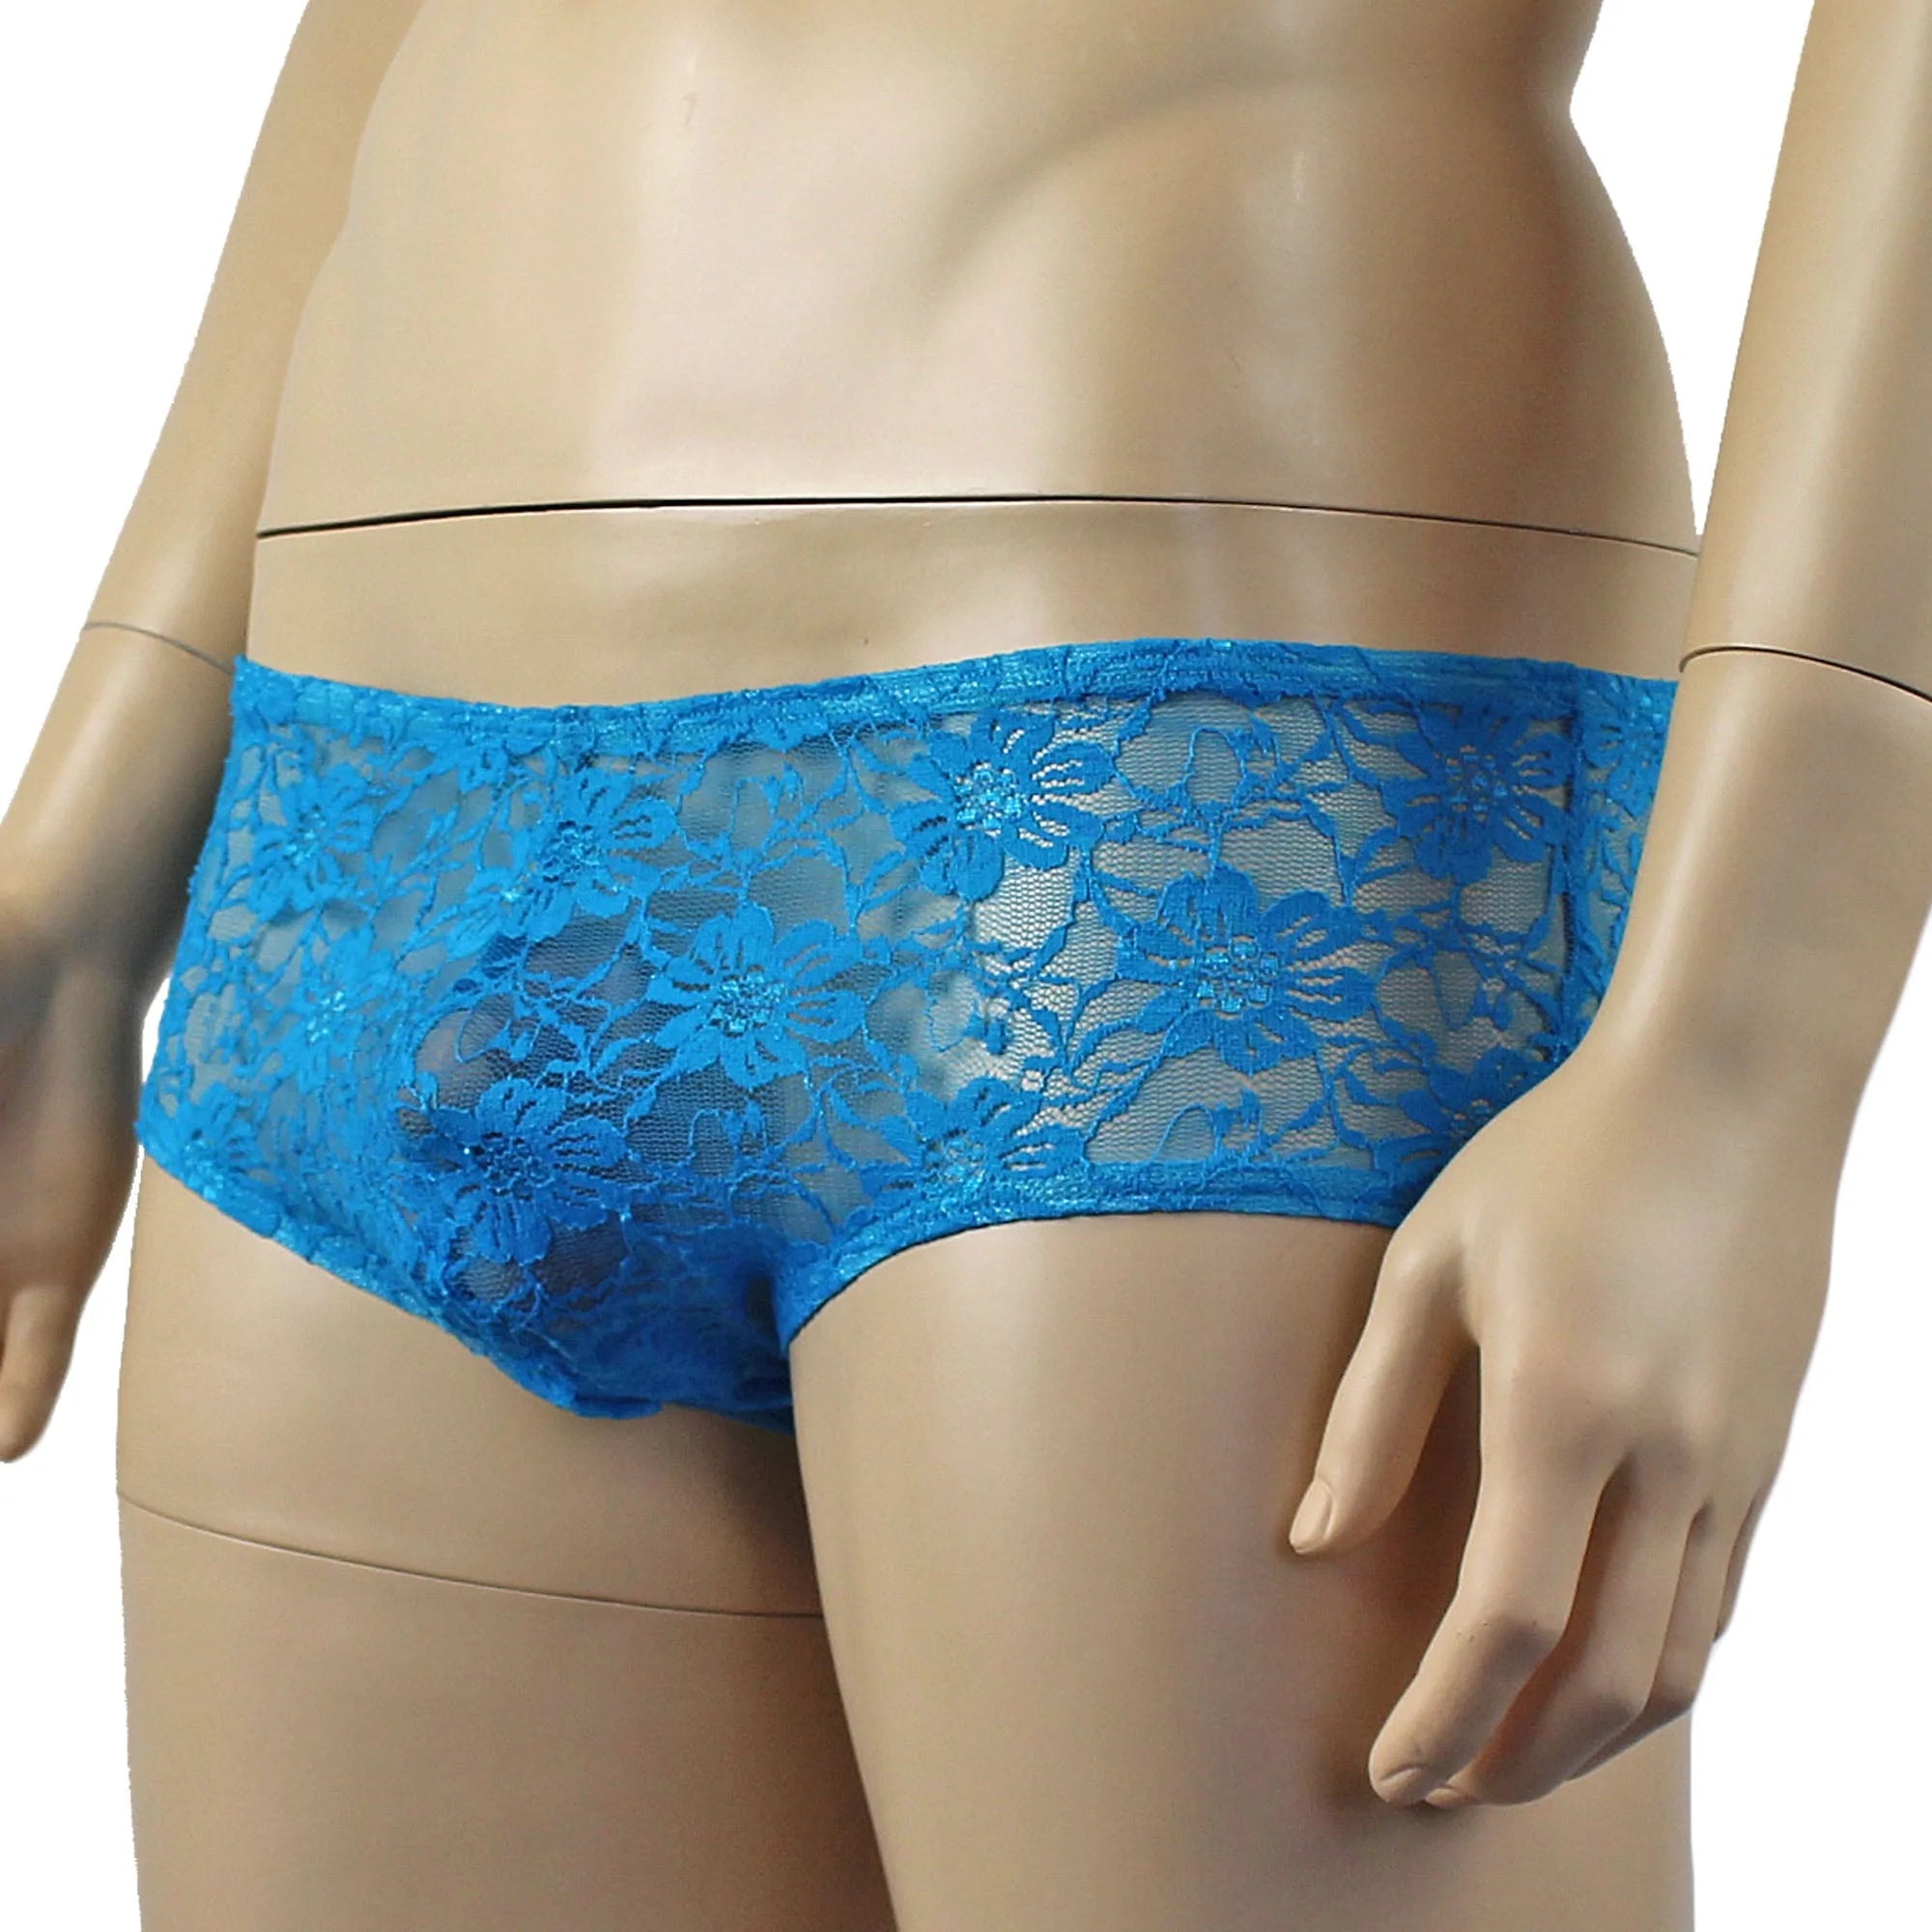 SALE - Mens Sexy Lingerie Stretch Lace  Male Panty Bikini Brief Turquoise